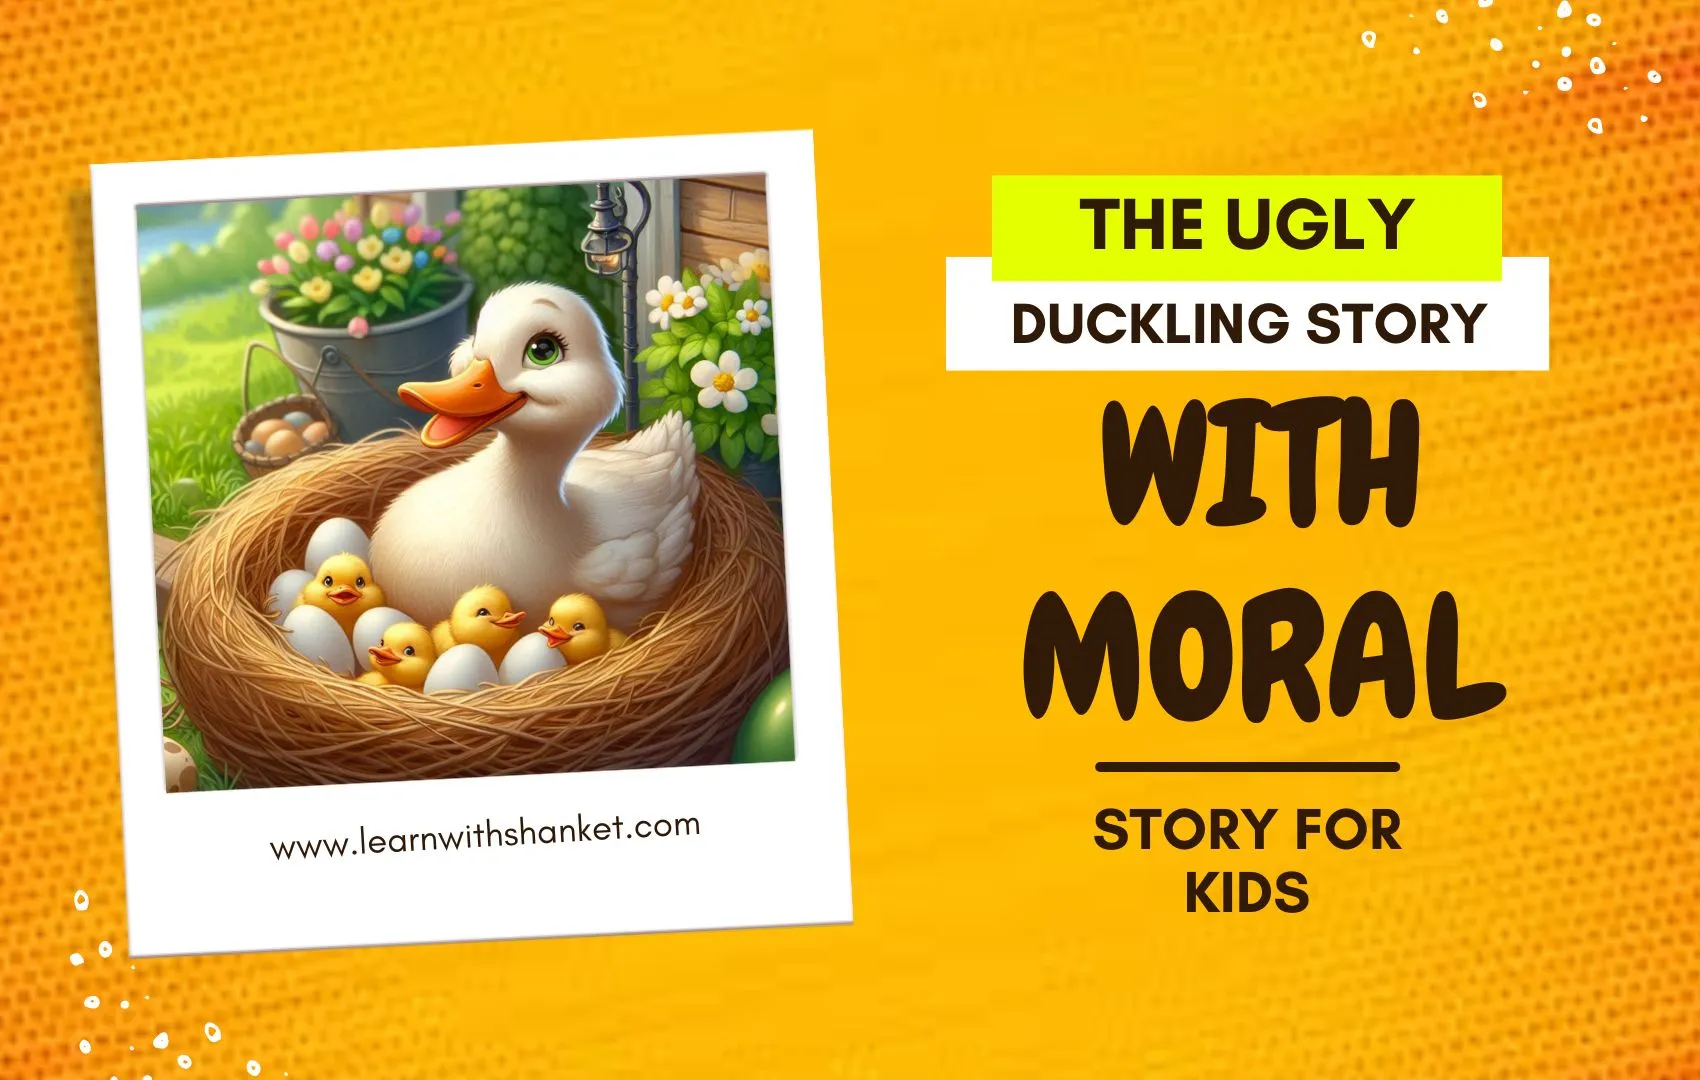 This Image About The Ugly Duckling Story